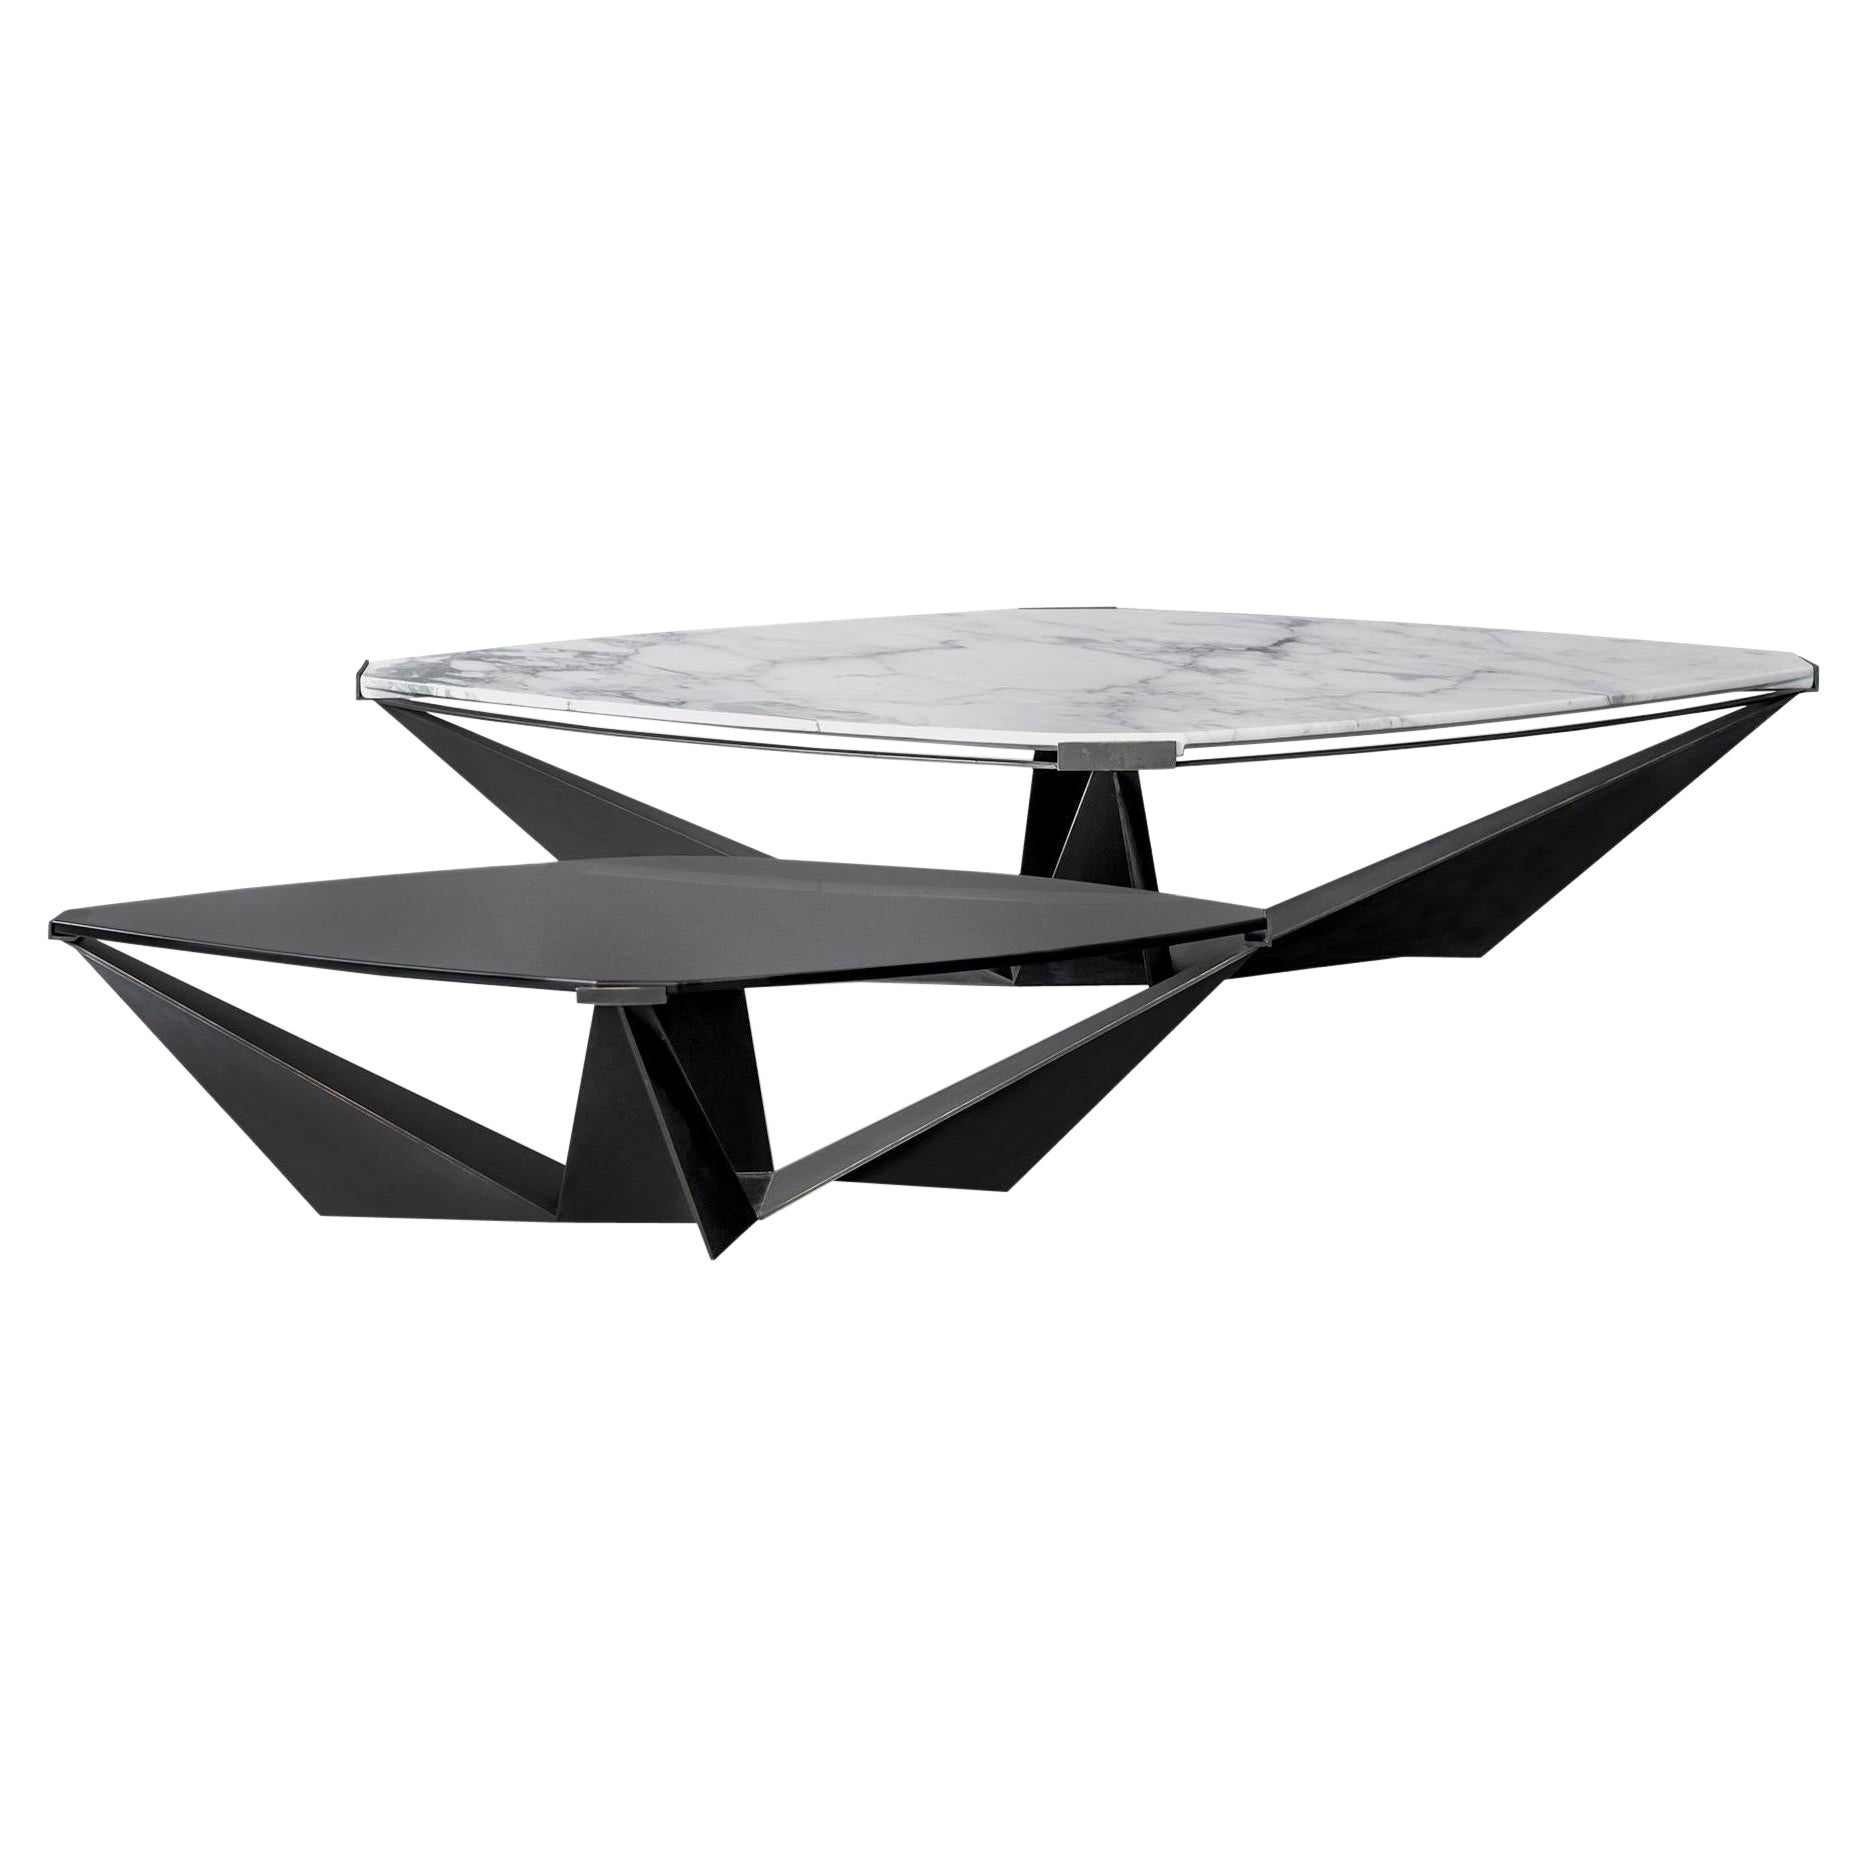 Set of 2 Kactis Coffee Table by Atra Design For Sale